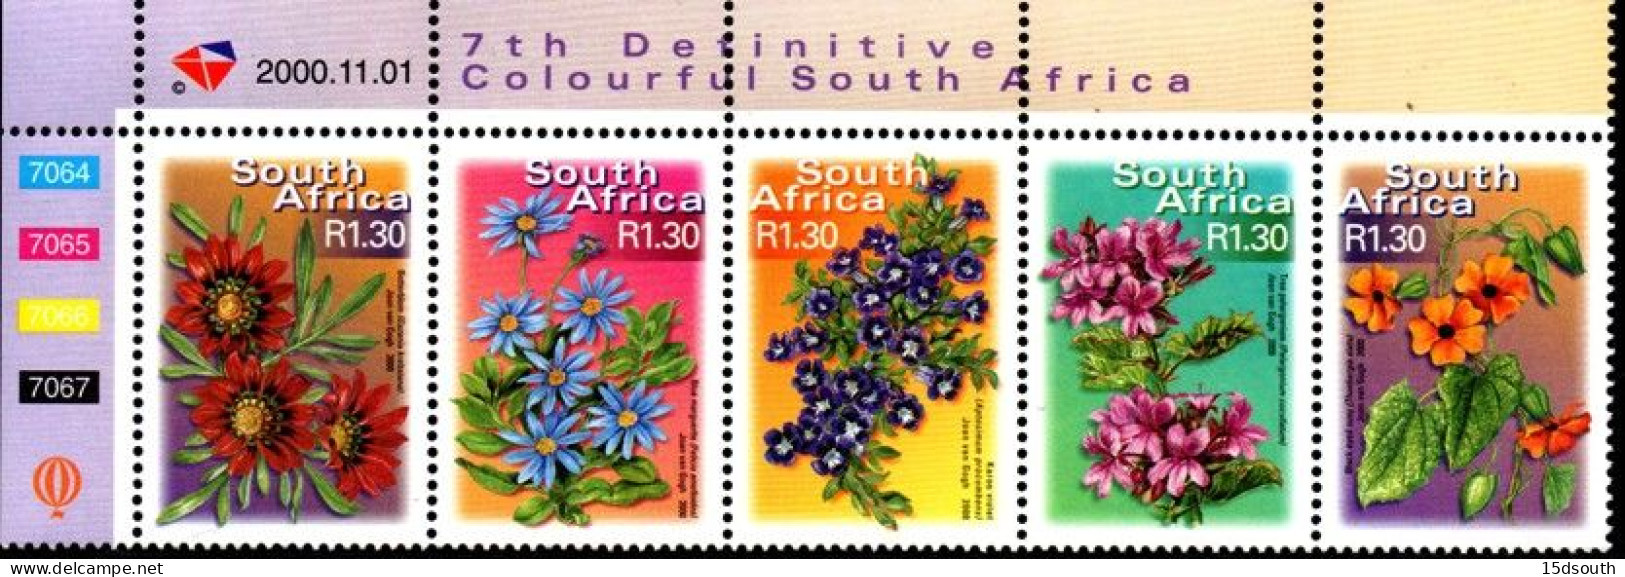 South Africa - 2000 7th Definitive Fauna And Flora R1.30 Control Block (**) (2000.11.01) - Hojas Bloque